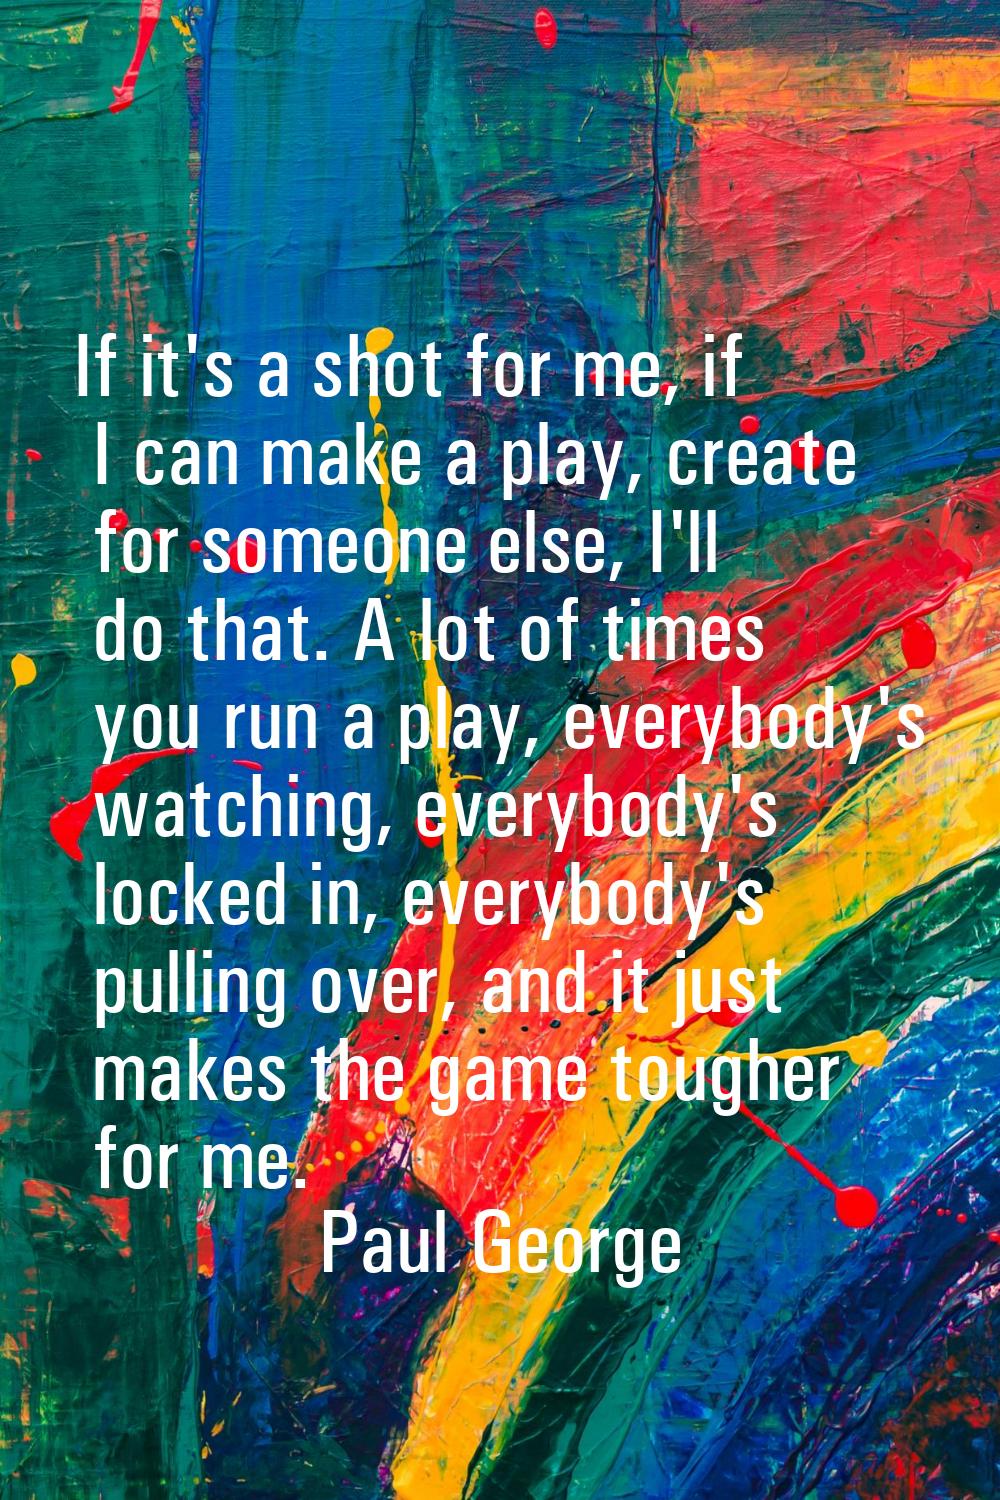 If it's a shot for me, if I can make a play, create for someone else, I'll do that. A lot of times 